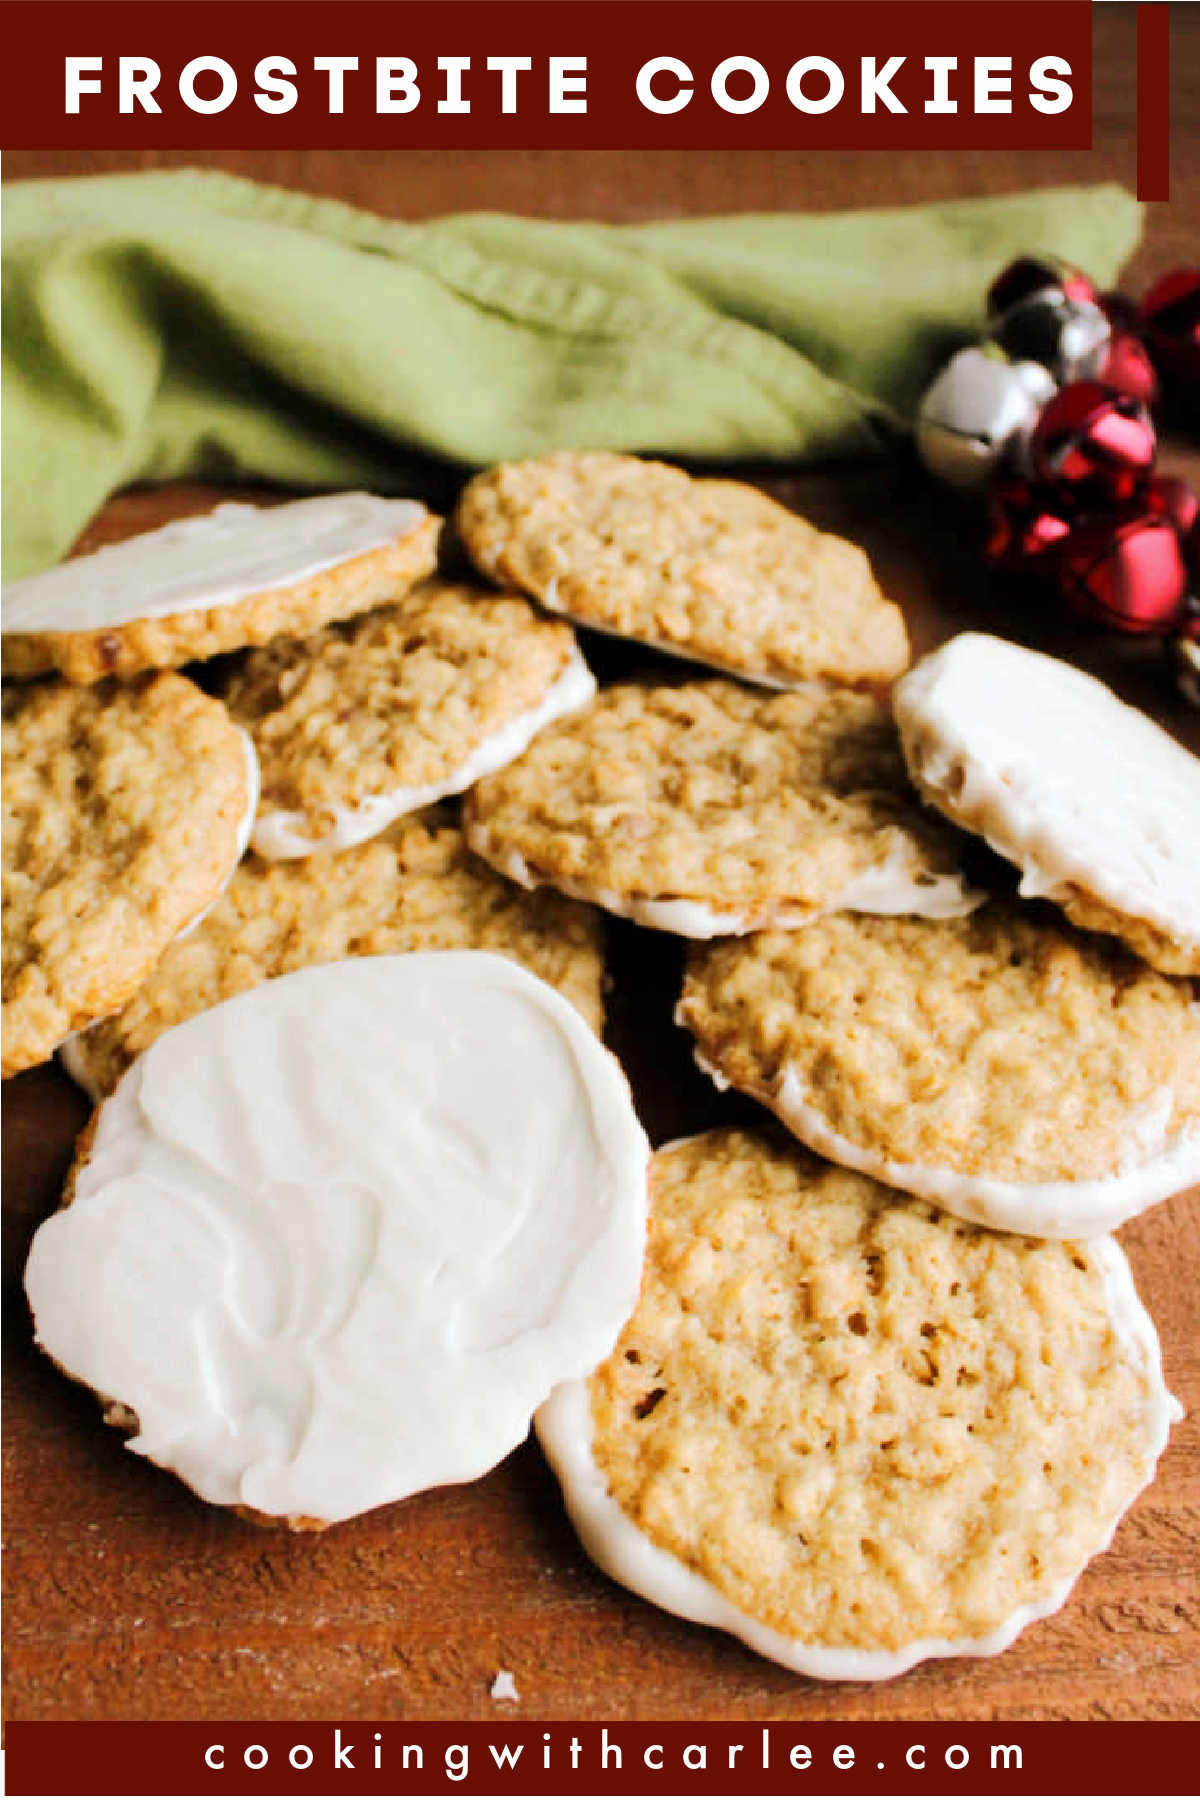 Frostbite cookies are the perfect combination of everything you’d want in a cookie. They have just a hint of peppermint, and that sweet buttery cross between being crunchy and melt in your mouth.